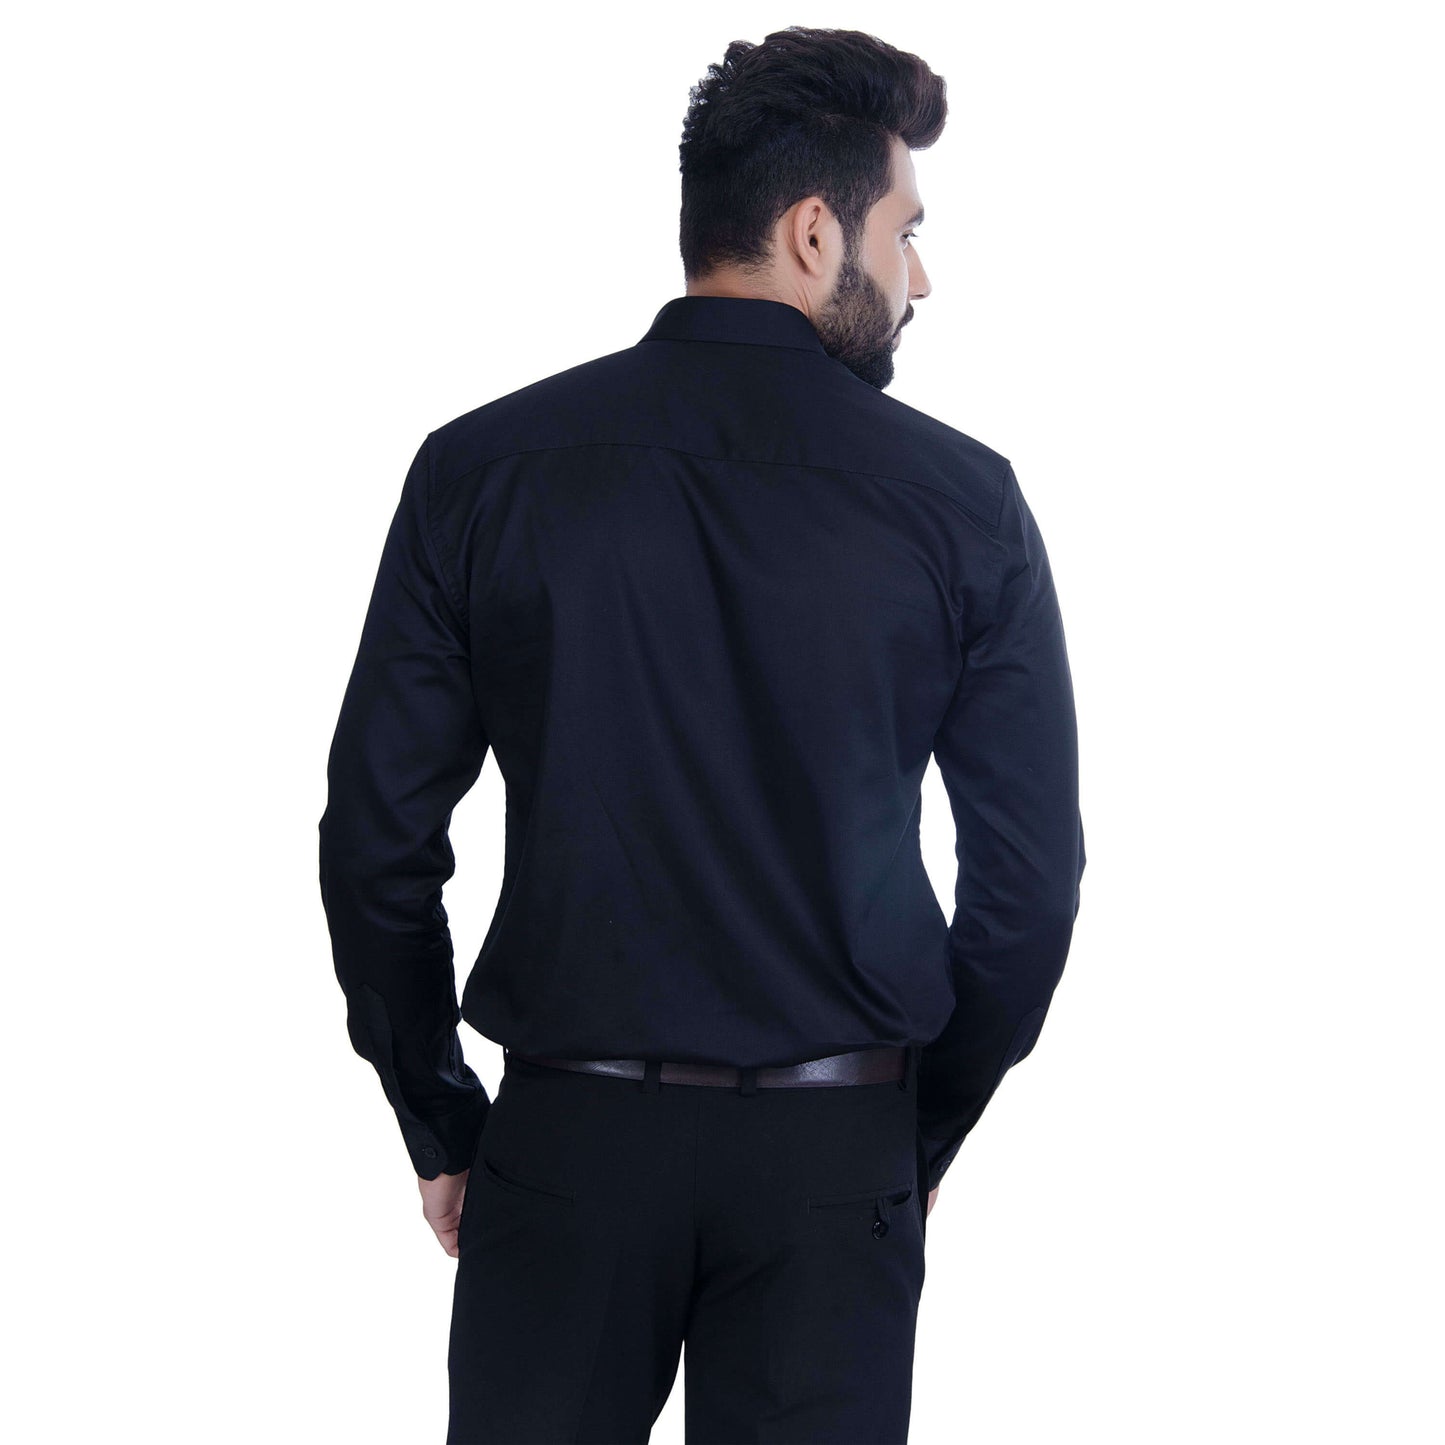 Black nunstitched mill made 100% cotton full width shirt piece for one full sleev shirt